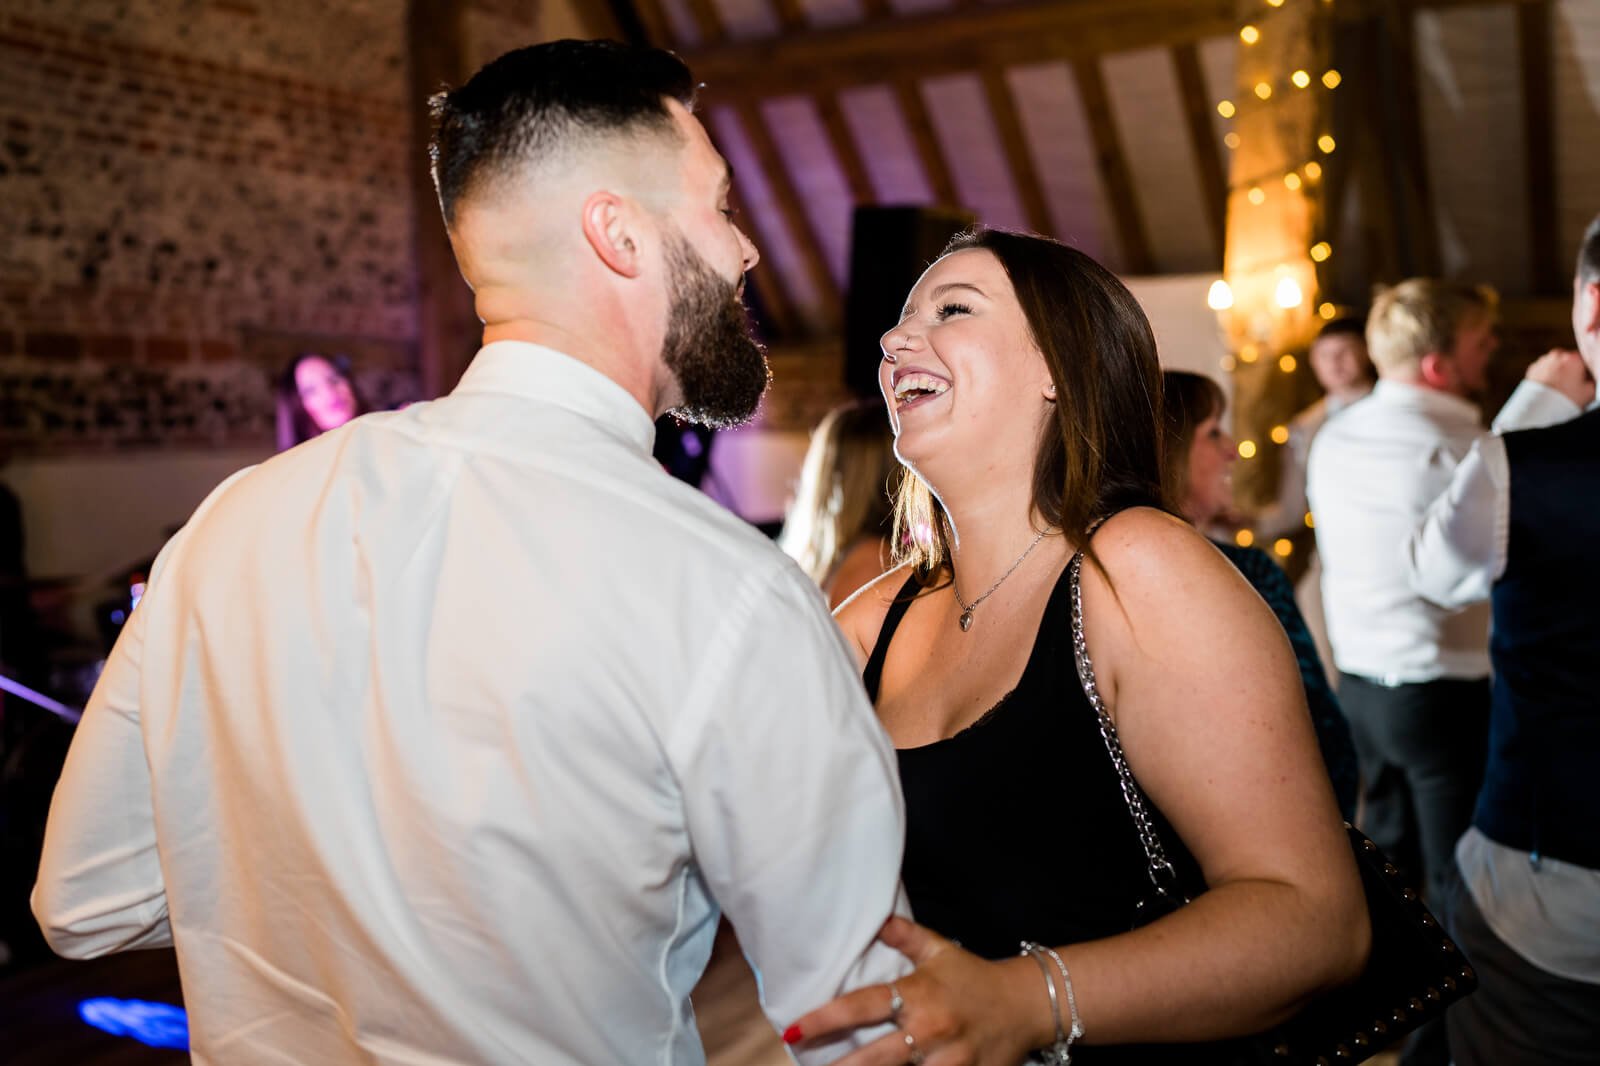 guests dancing at barford park wedding venue with band the deloreons